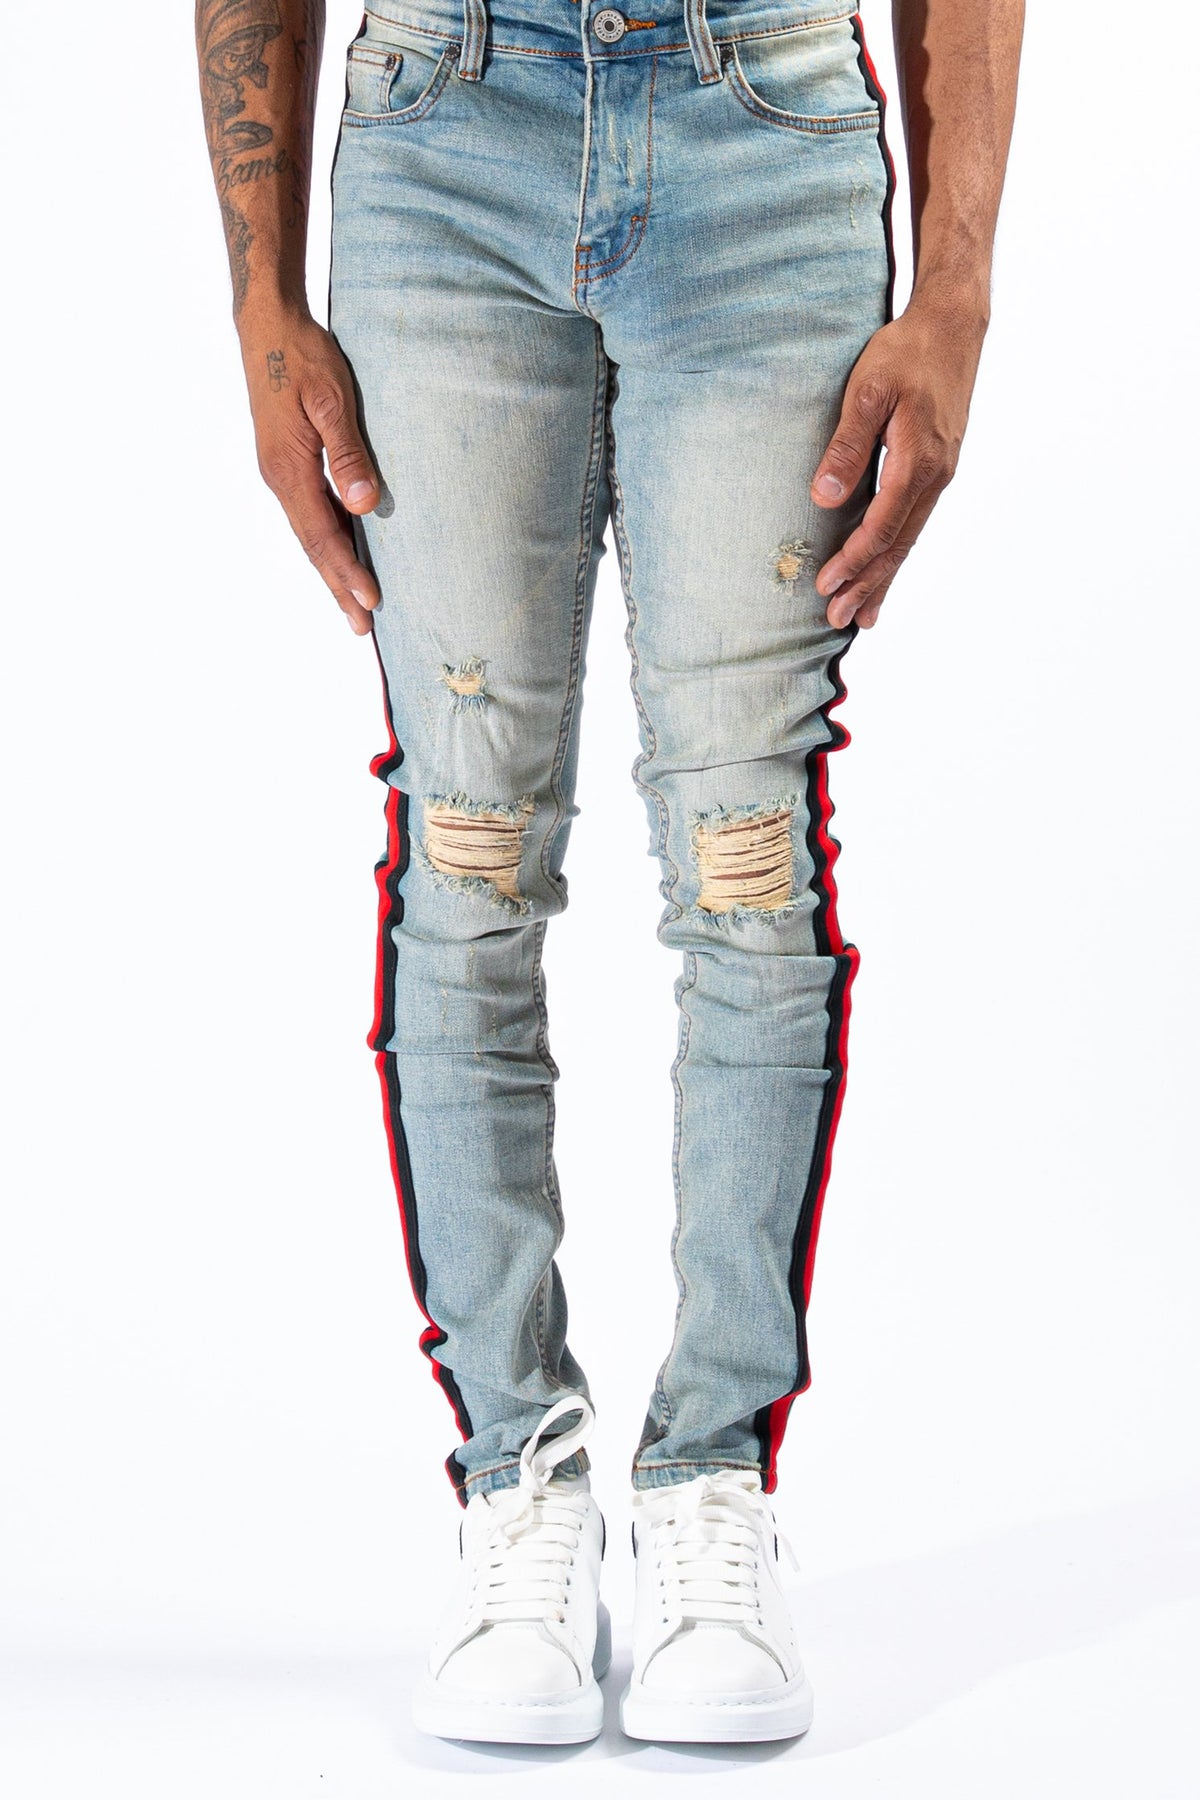 helix jeans discontinued